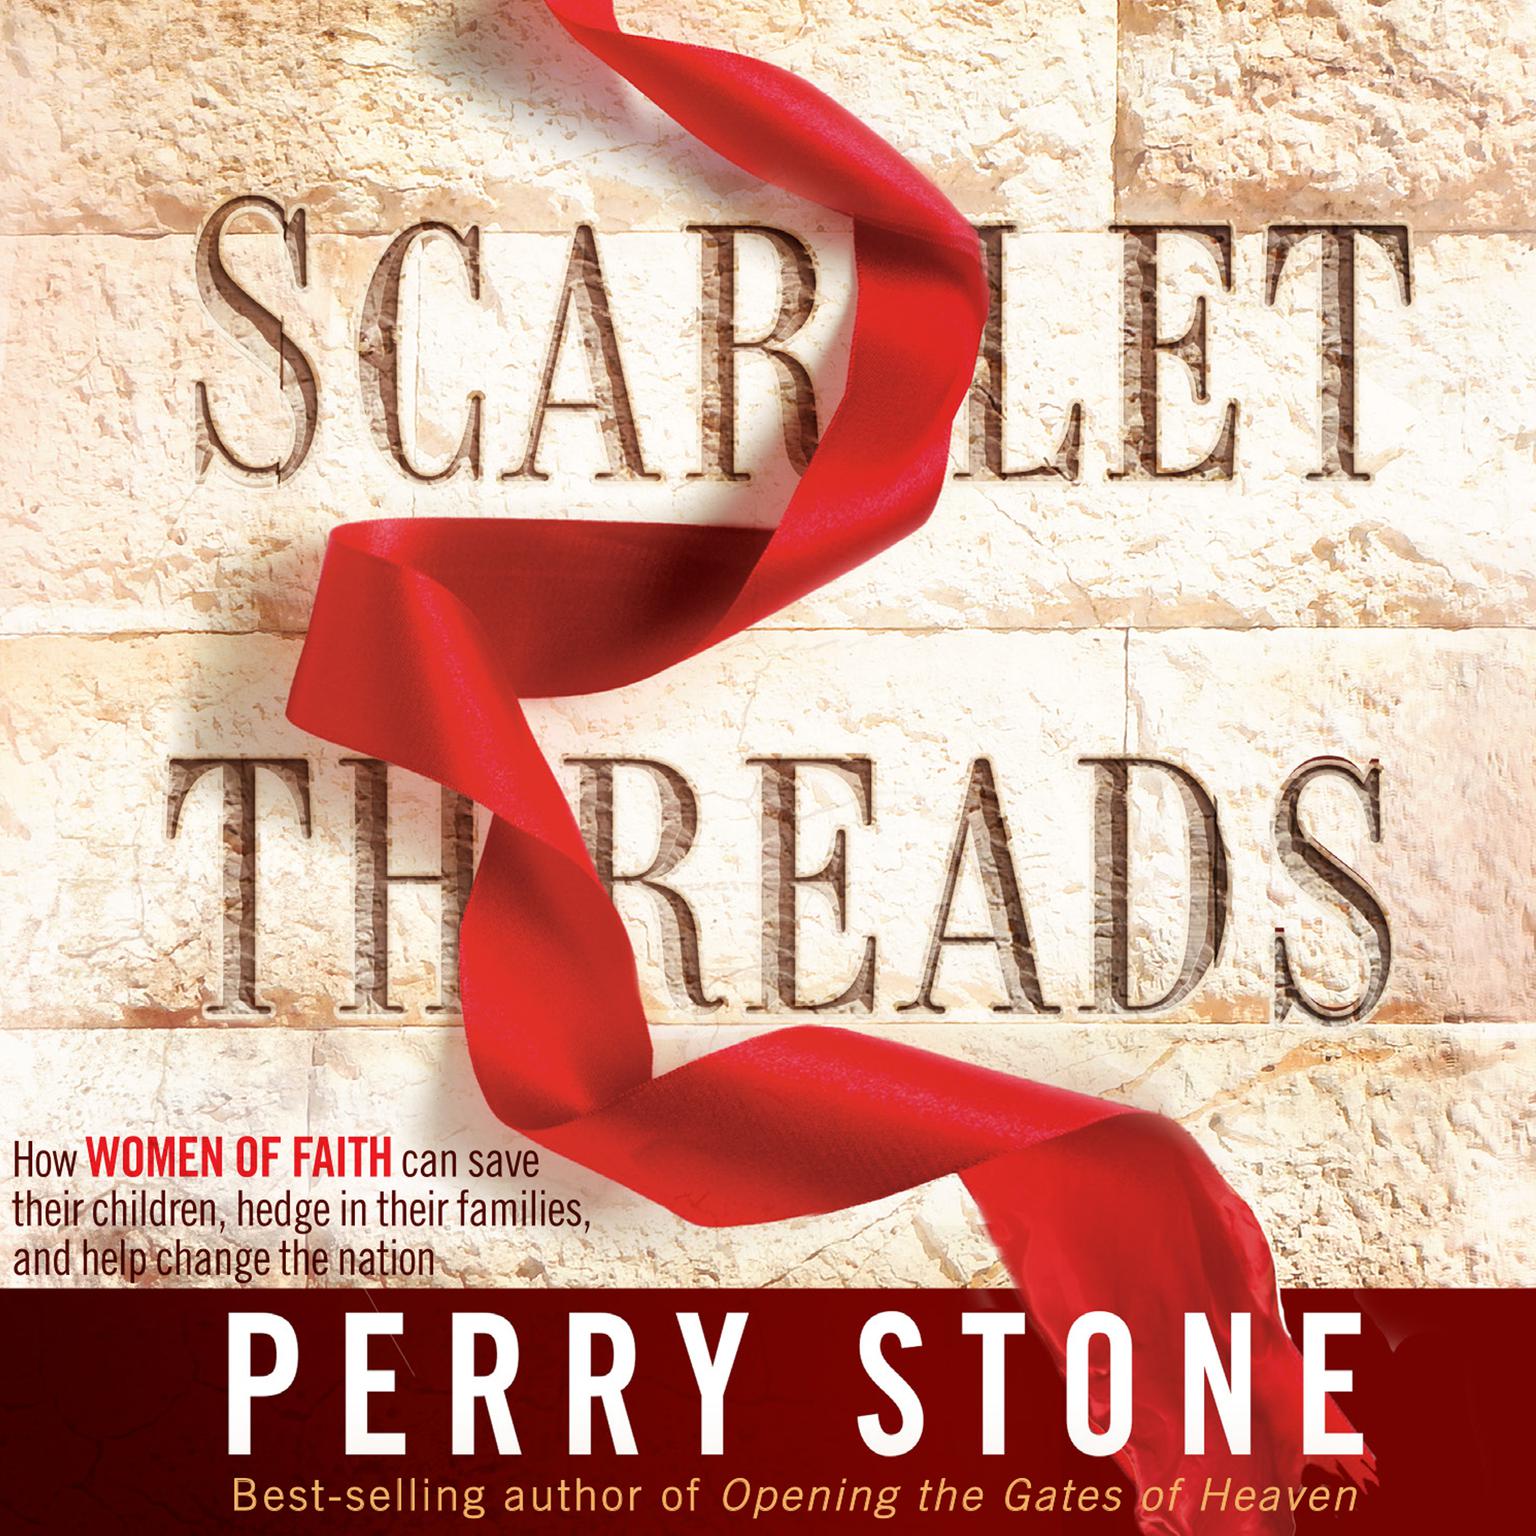 Scarlet Threads: How Women of Faith Can Save Their Children, Hedge in Their Families, and Help Change the Nation Audiobook, by Perry Stone